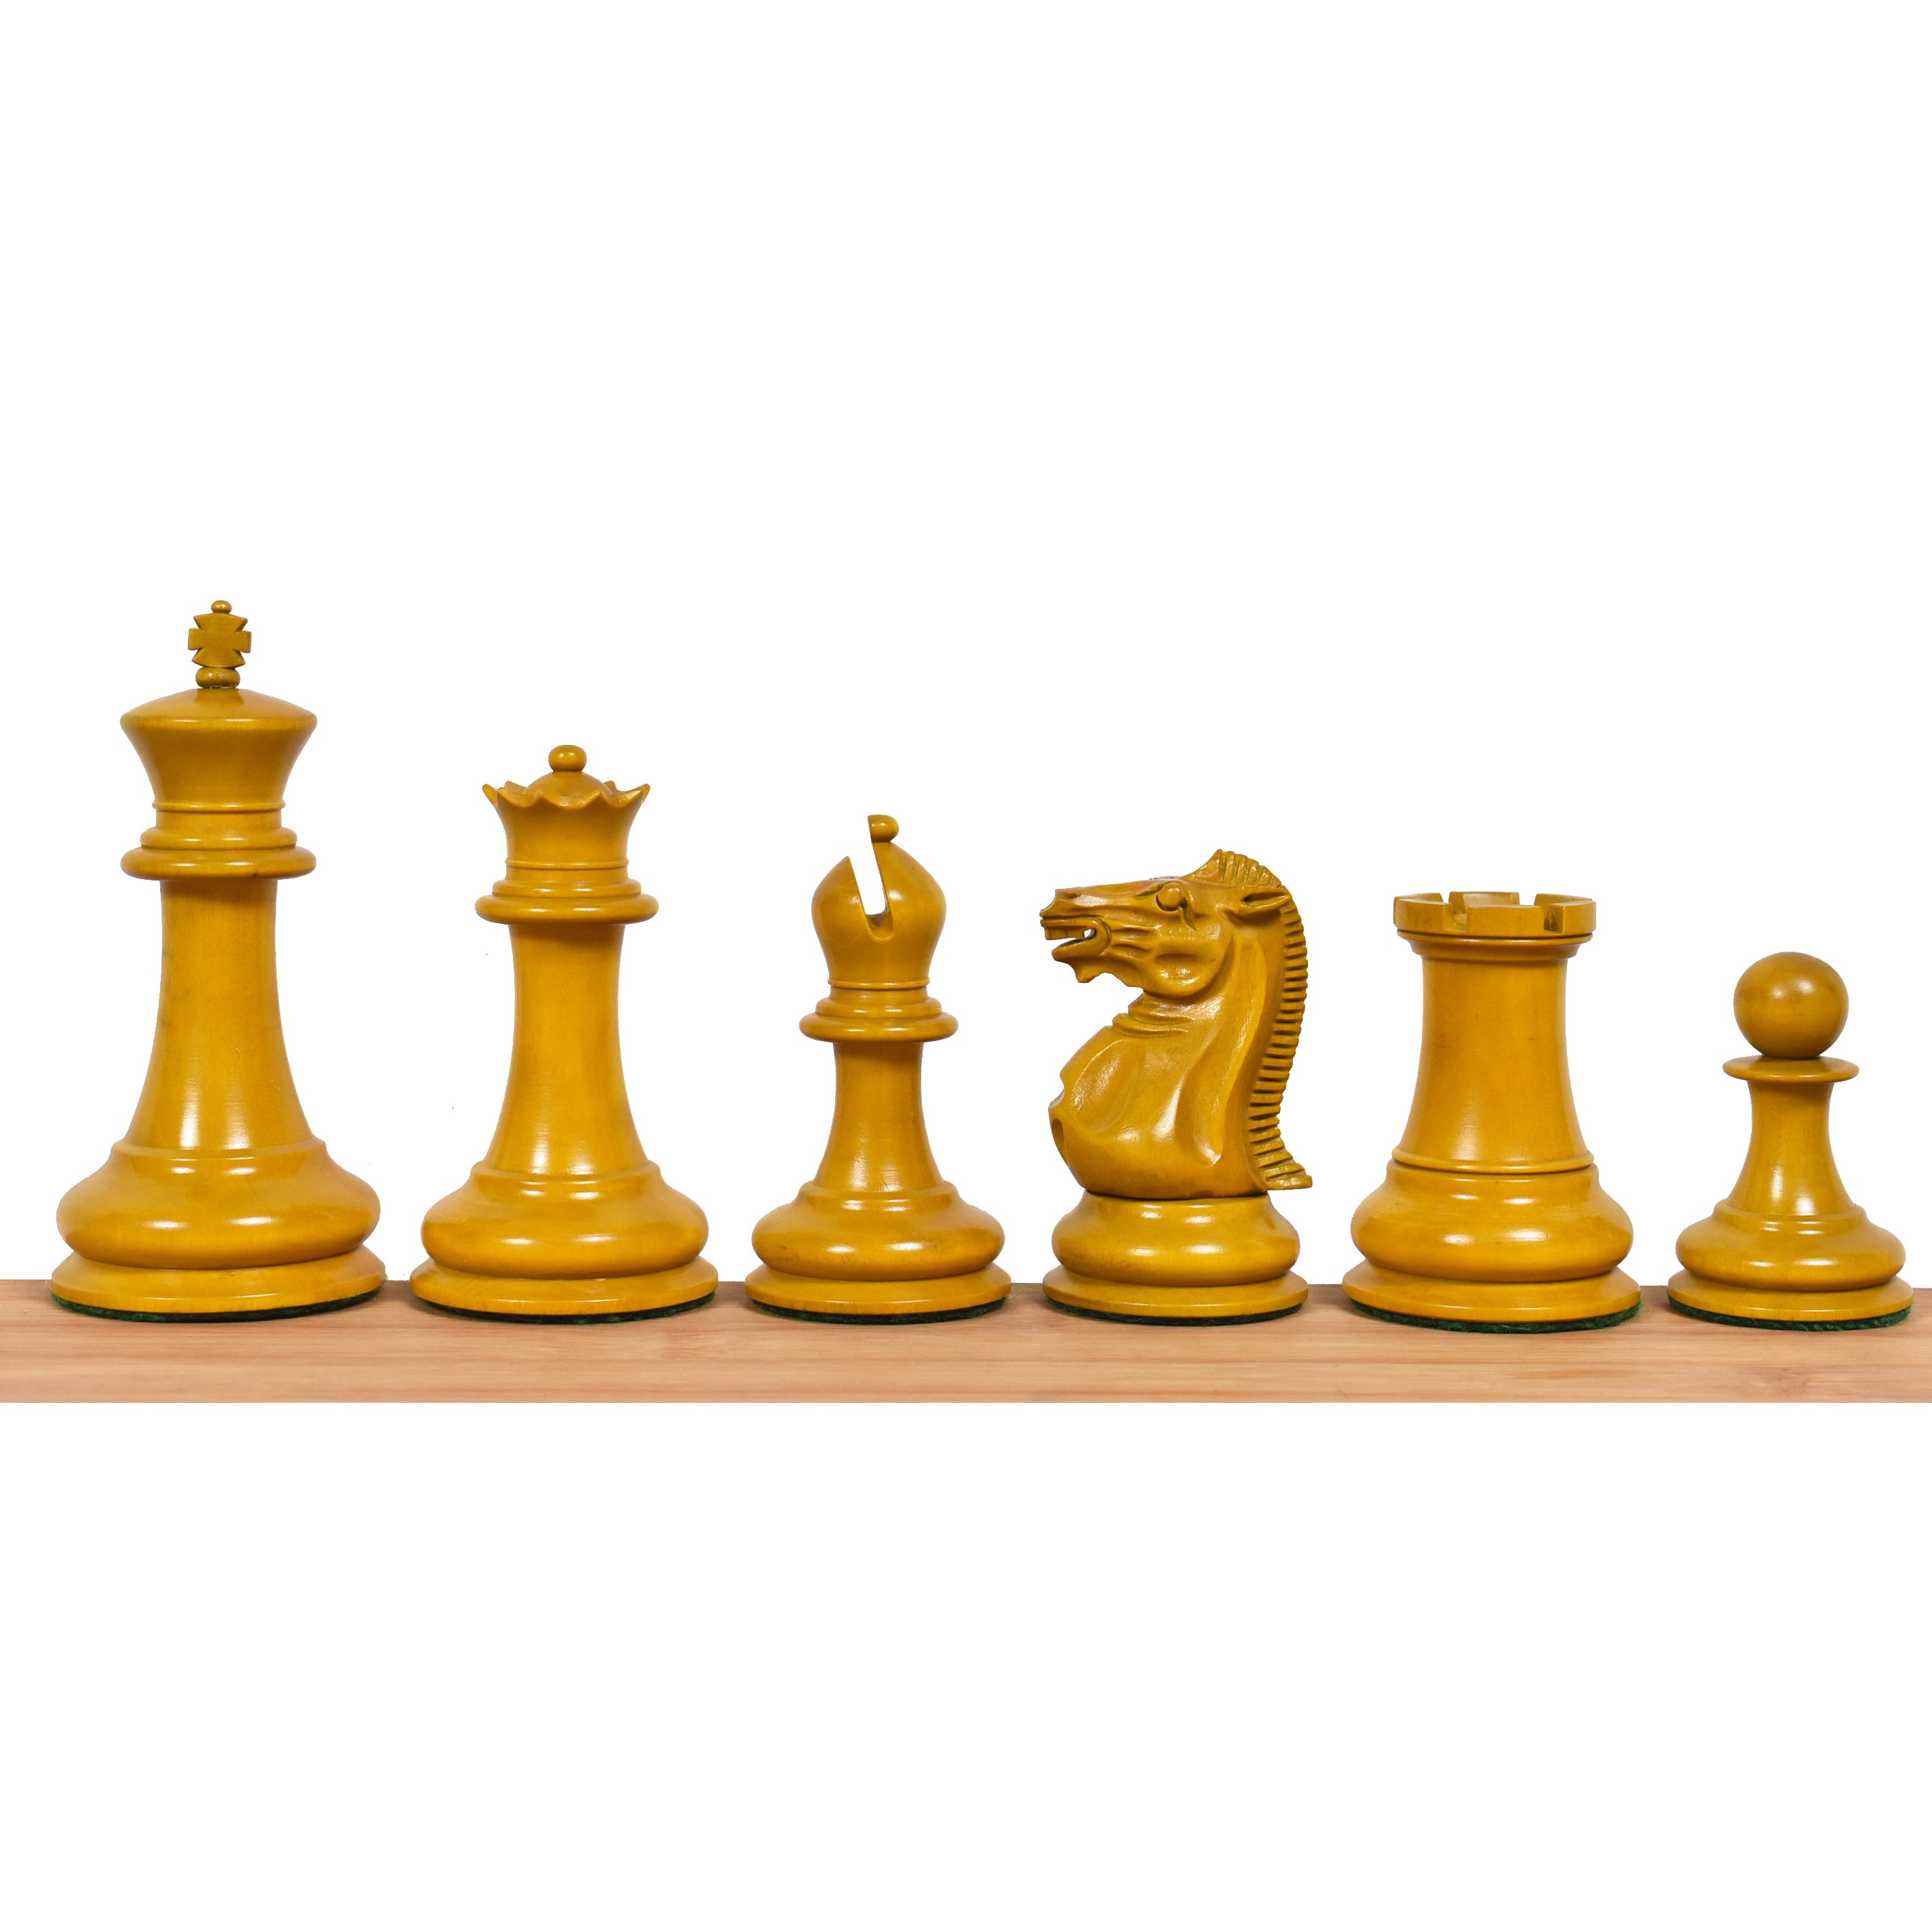 Reproduced 1849 Original Staunton Pattern Chess Set in Lacquer 